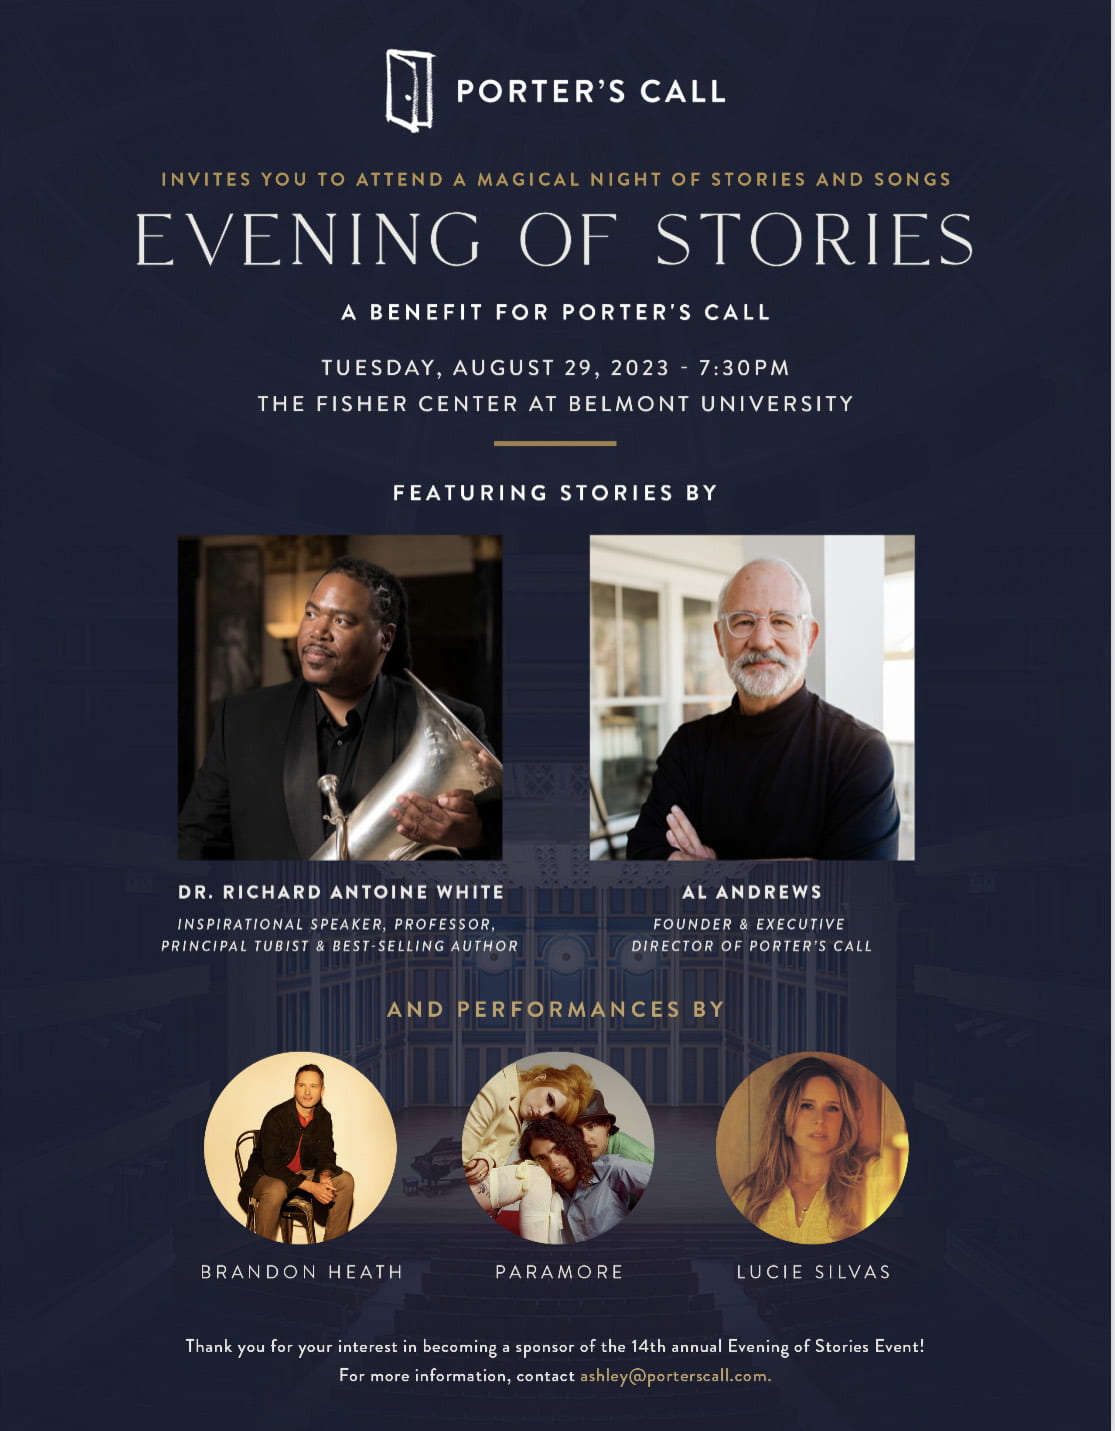 Porter's Call Evening of Stories 2023